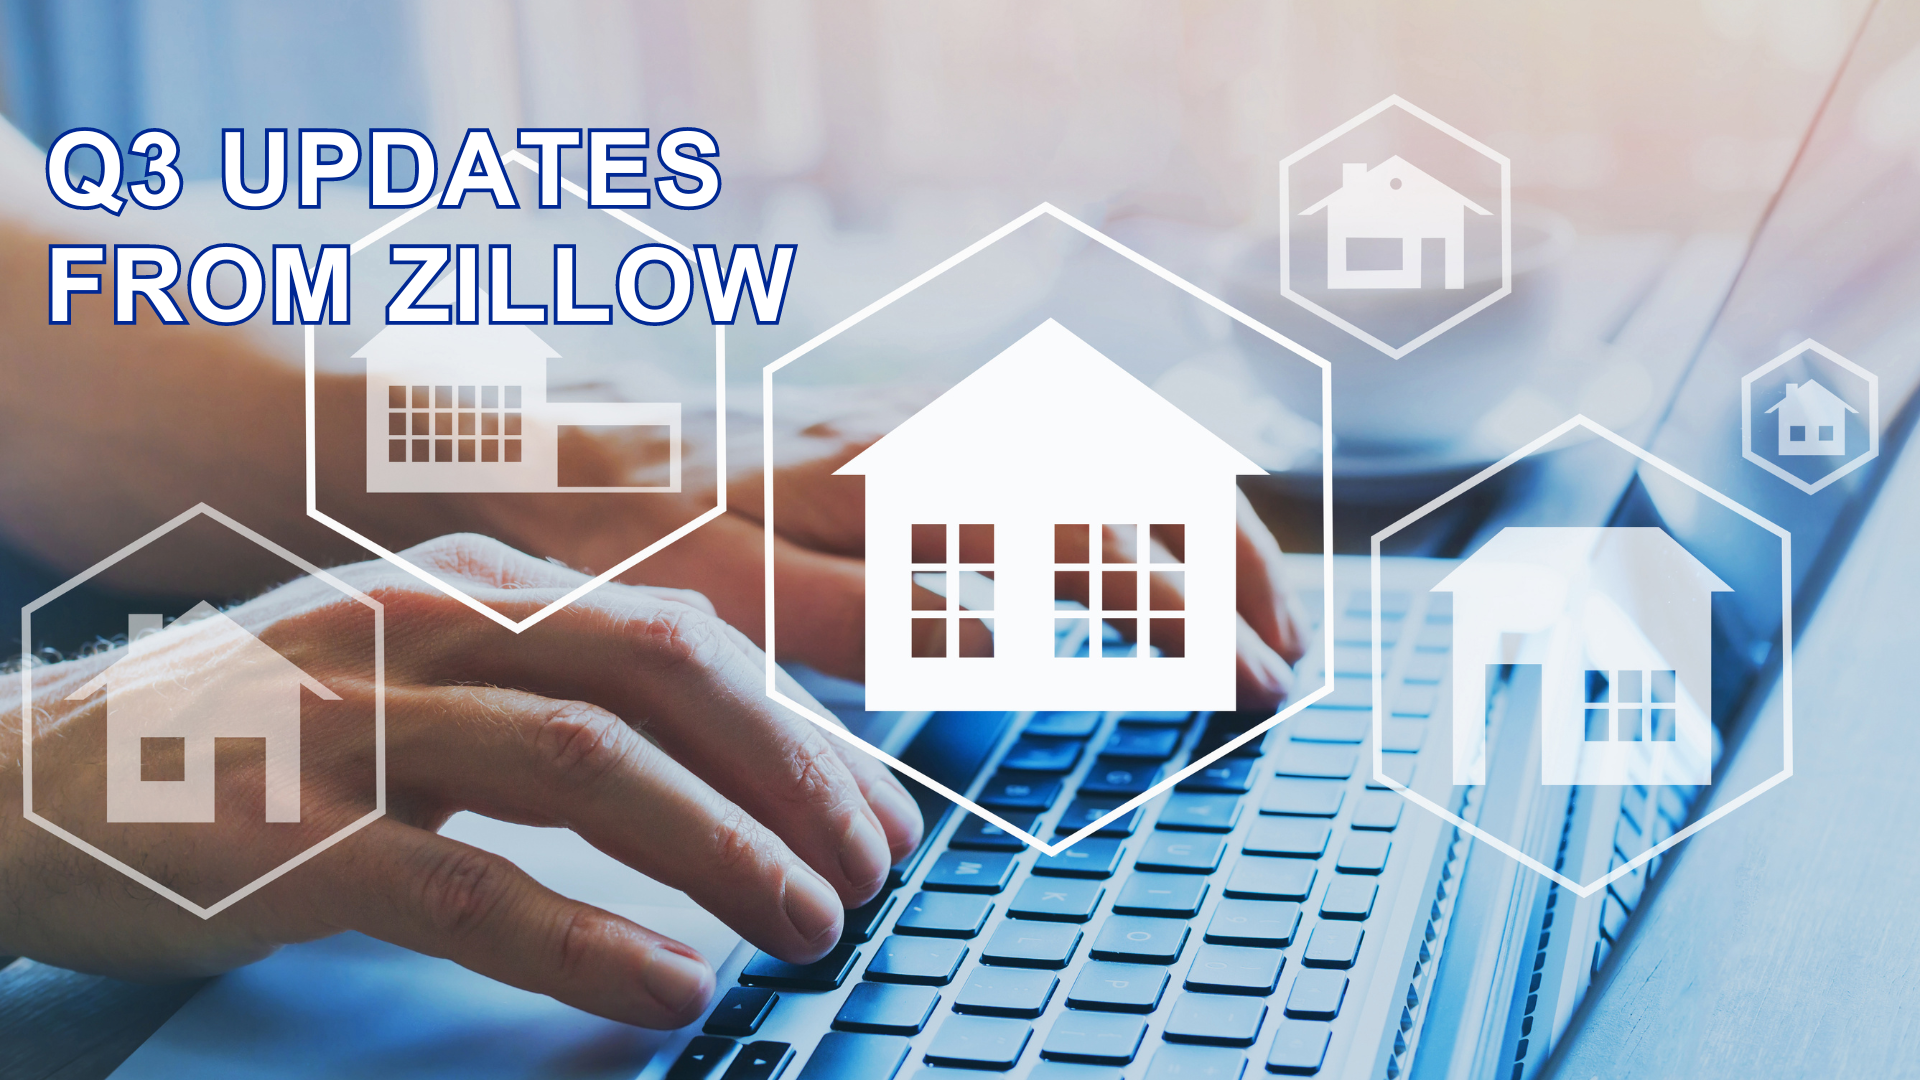 Q3 Updates from Zillow